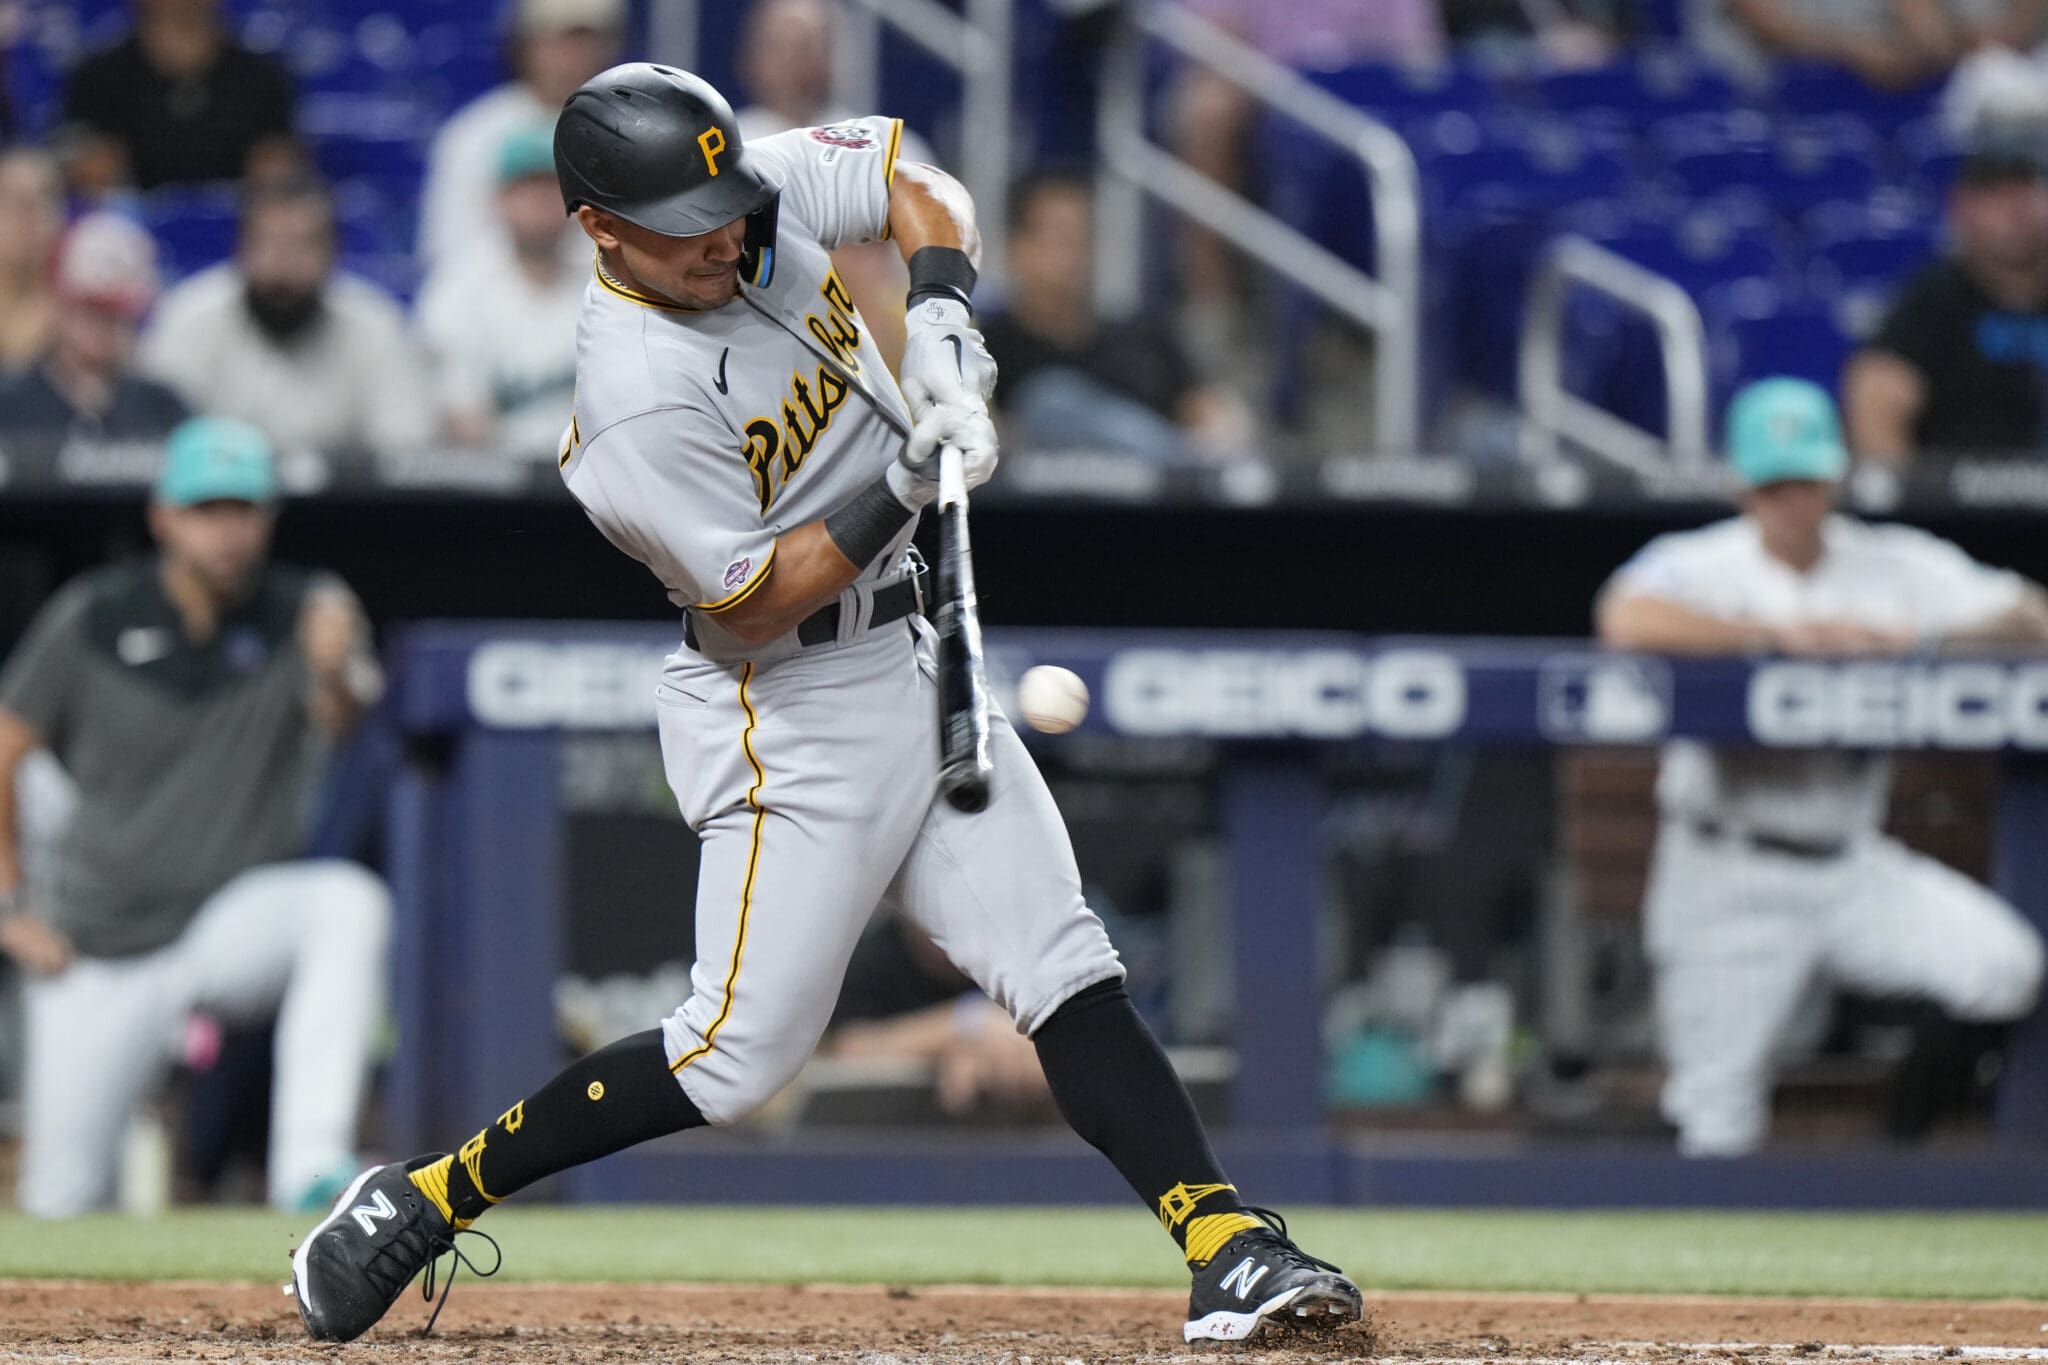 Pittsburgh Pirates' Nick Gonzalez bats during the eighth inning of a baseball game against the Miami Marlins, Friday, June 23, 2023, in Miami. The Pirates called up another first-round draft pick, selecting touted infielder Gonzales from Triple-A Indianapolis. Gonzales made his major league debut Friday night, starting at second base and batting seventh against the Marlins. (AP Photo/Wilfredo Lee)